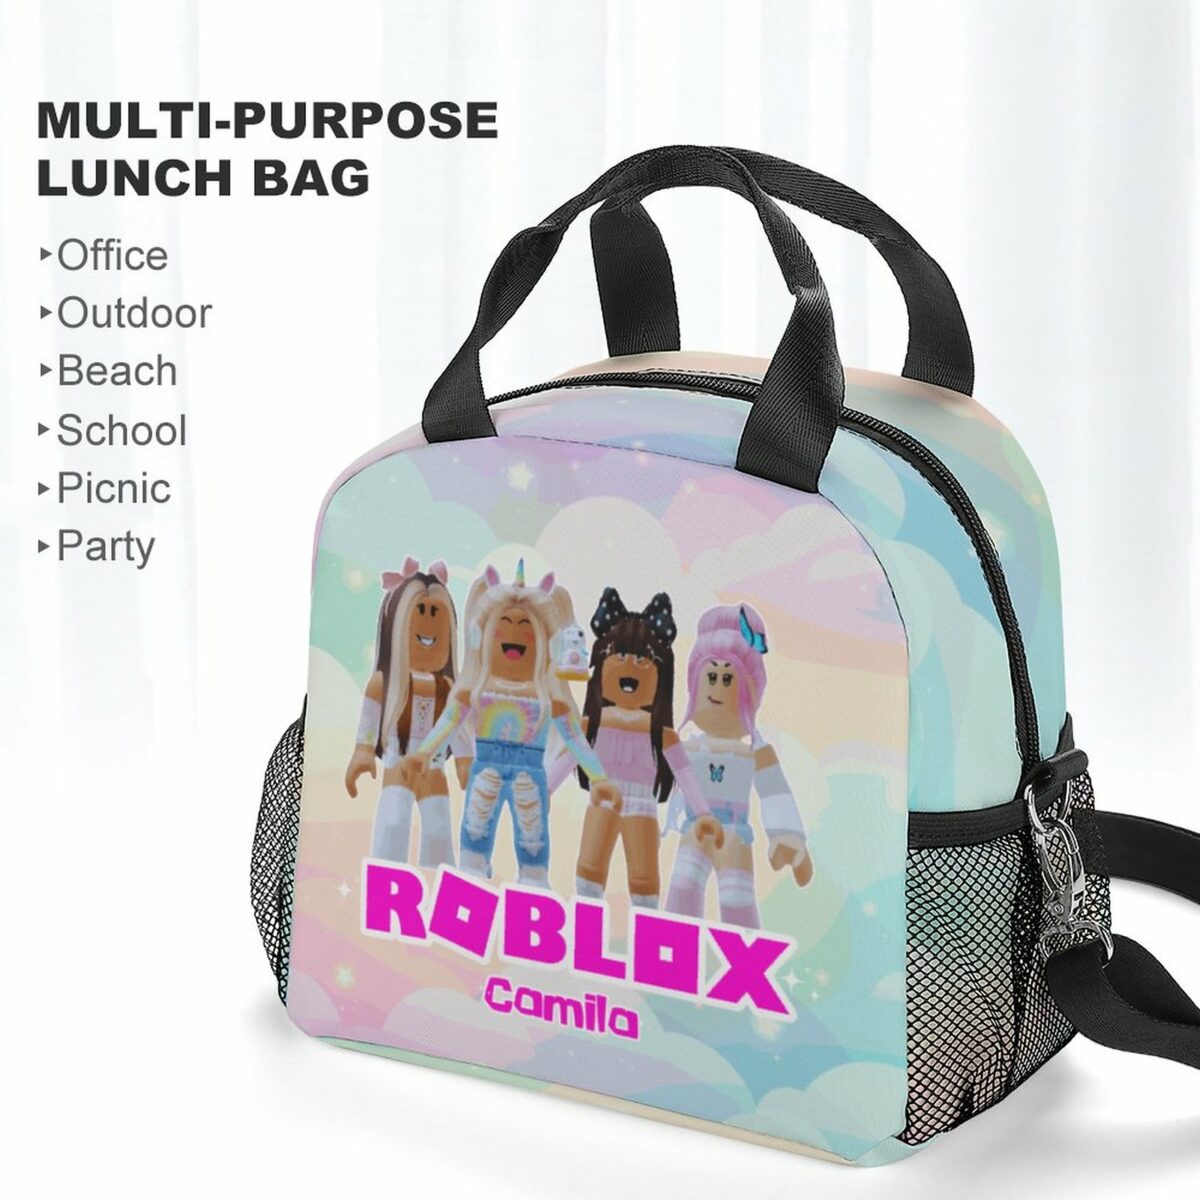 Customizable Name Roblox Girls Insulated Lunch Crossbody Bag with Strap for School, Beach, Picnic Cool Kiddo 20